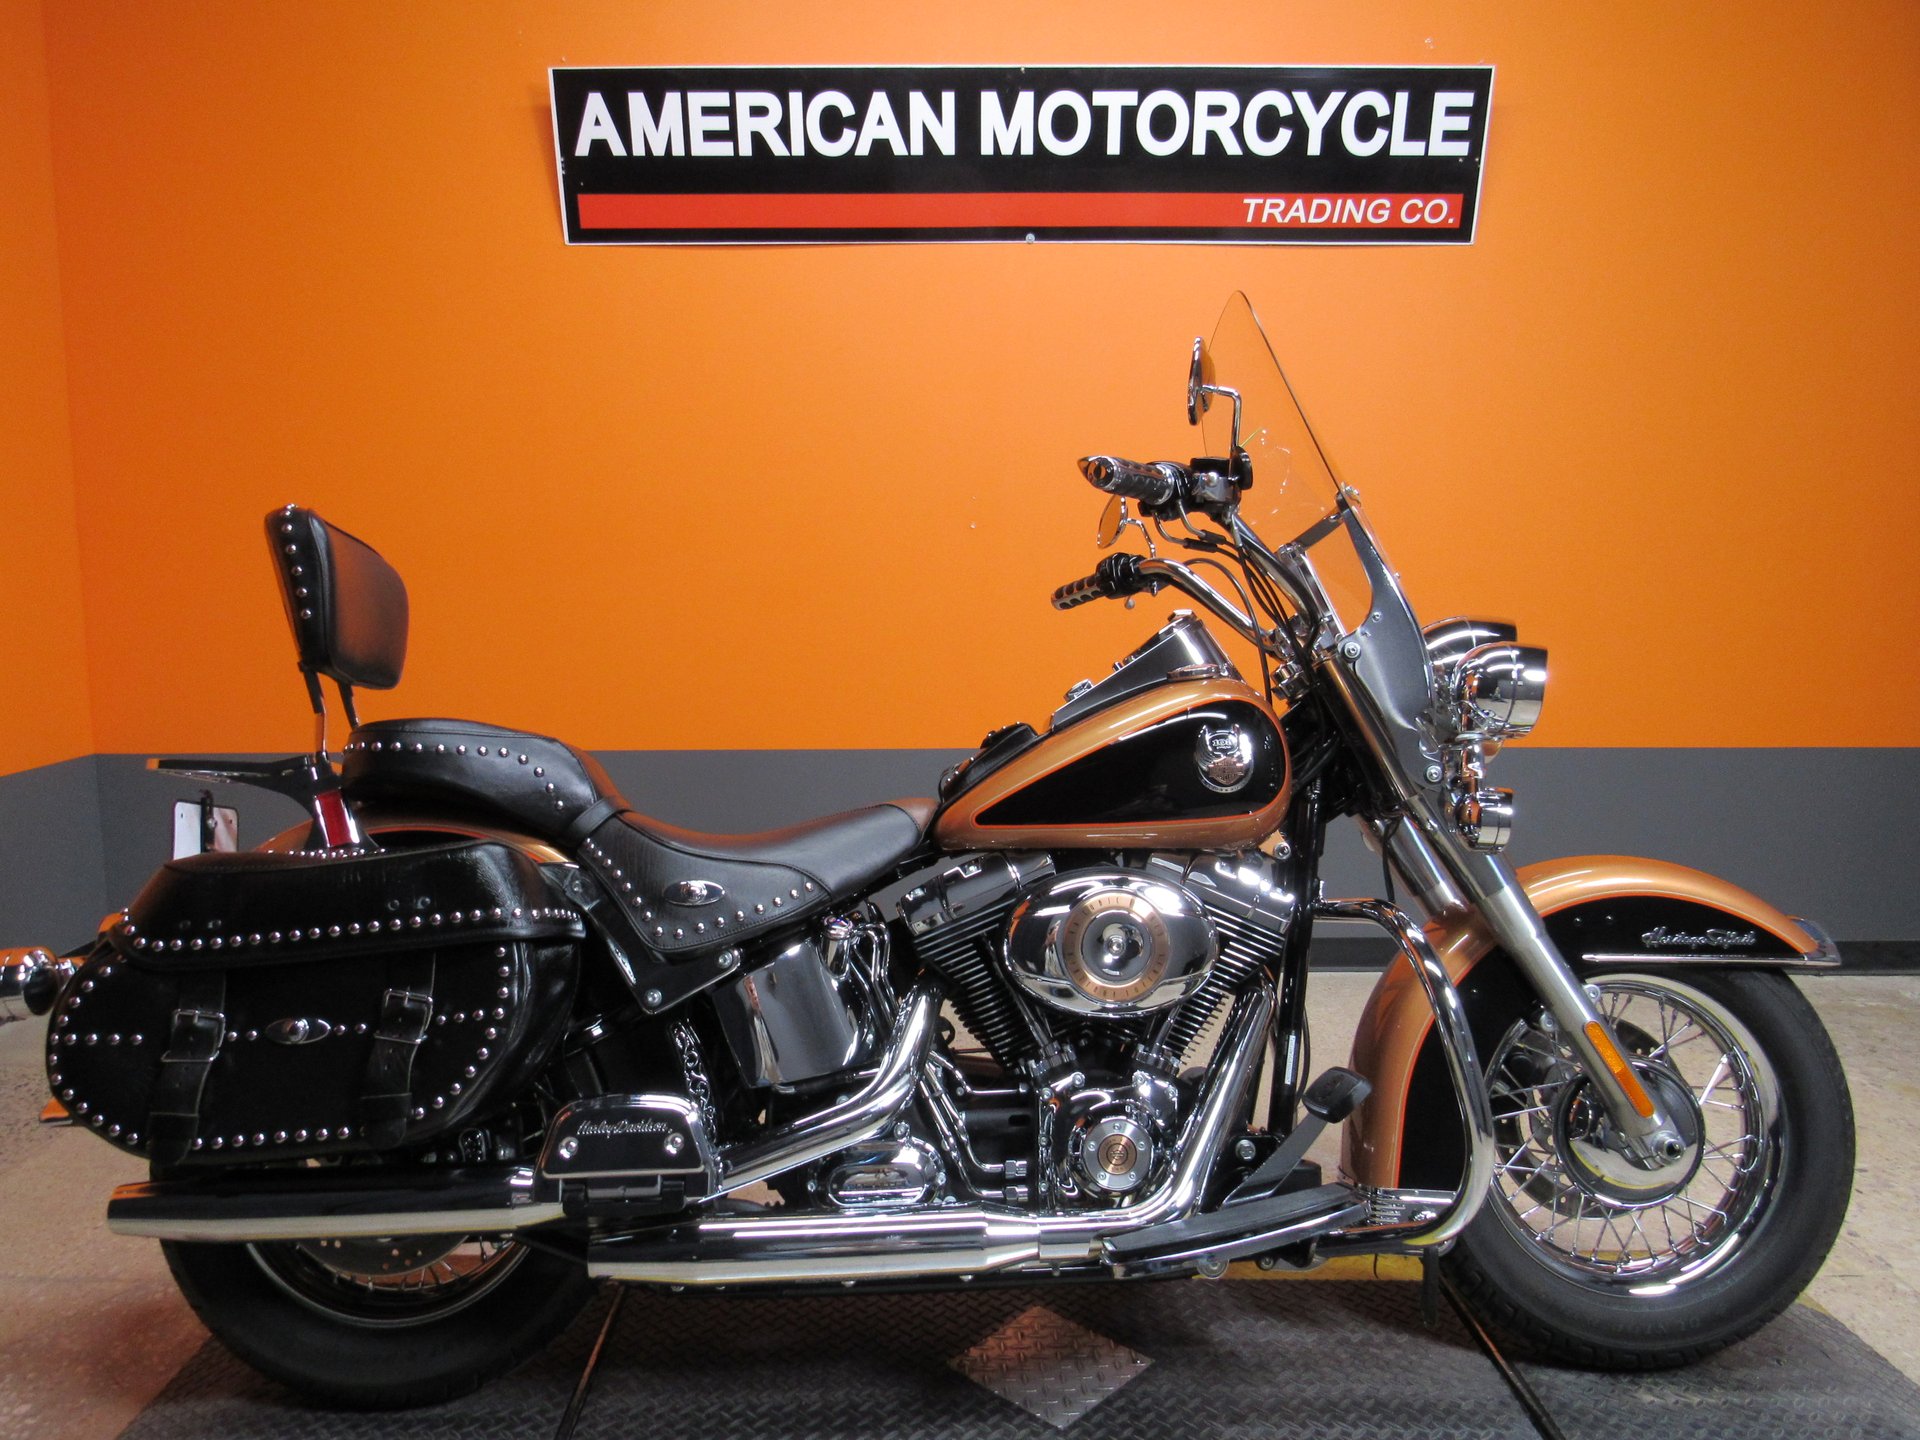 2008 Harley Davidson Softail Heritage Classic American Motorcycle Trading Company Used Harley Davidson Motorcycles